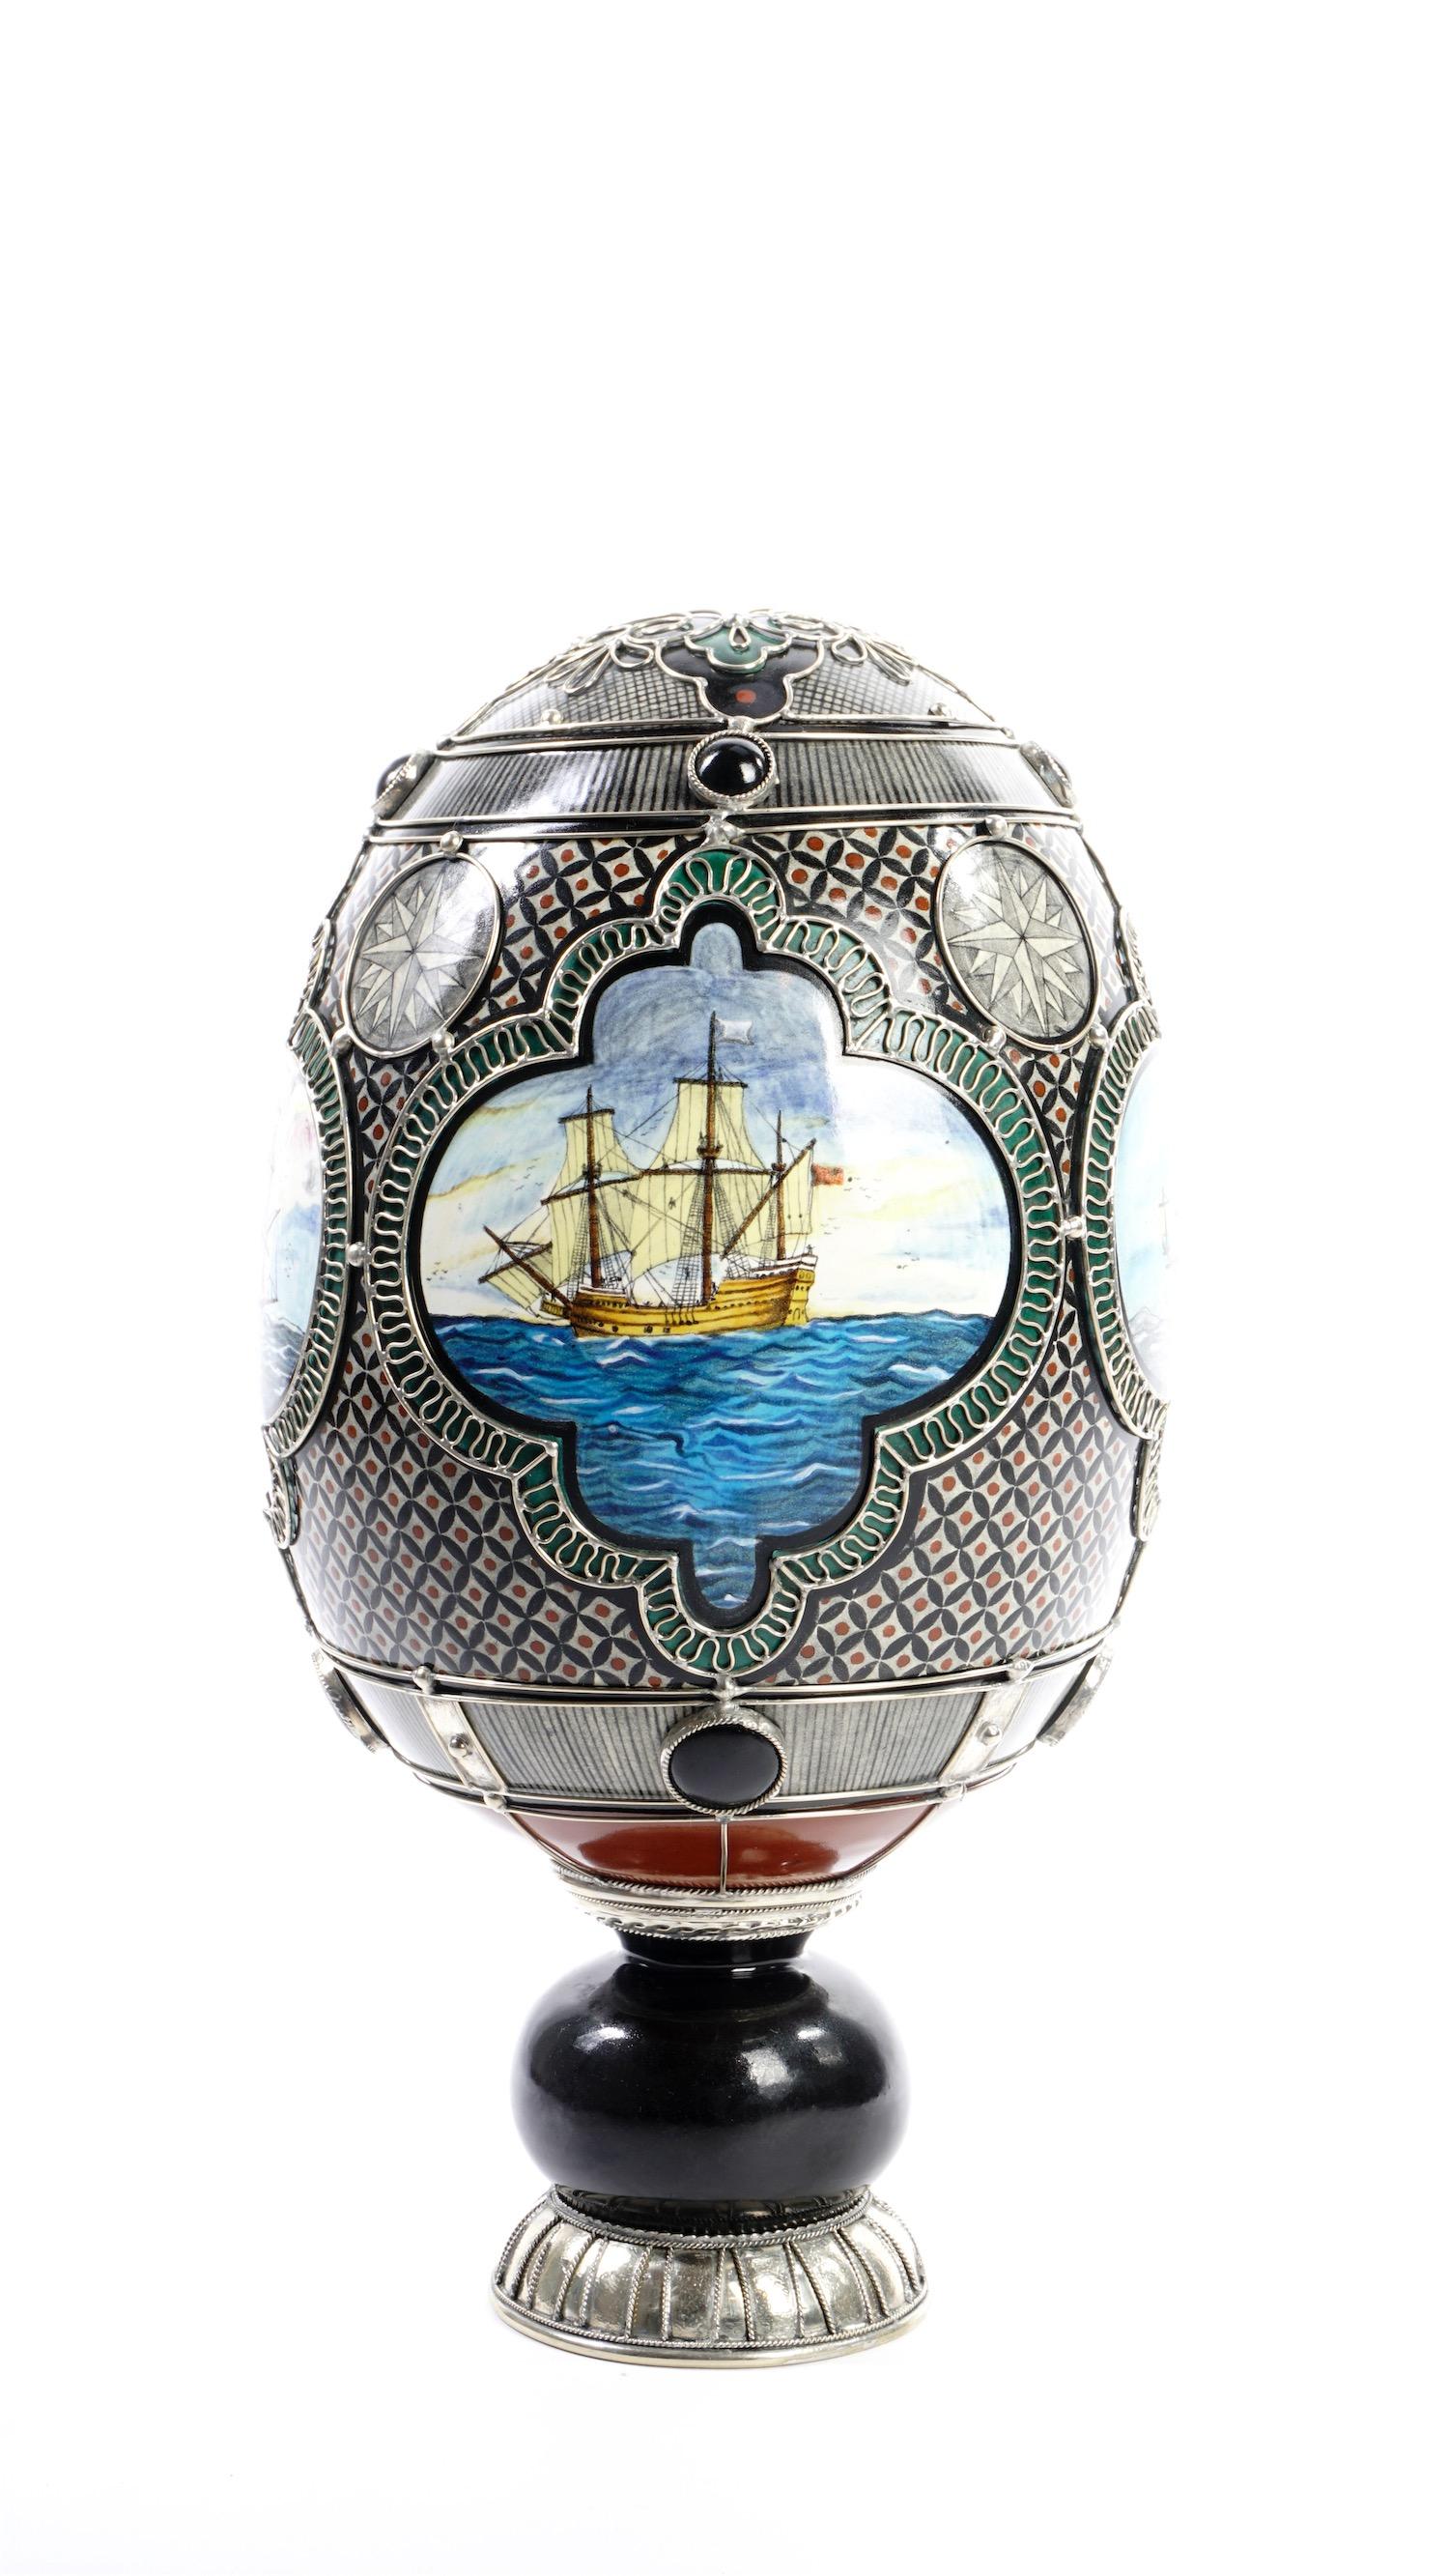 Other Caravels Ceramic Egg and White Metal ‘Alpaca’, Handmade